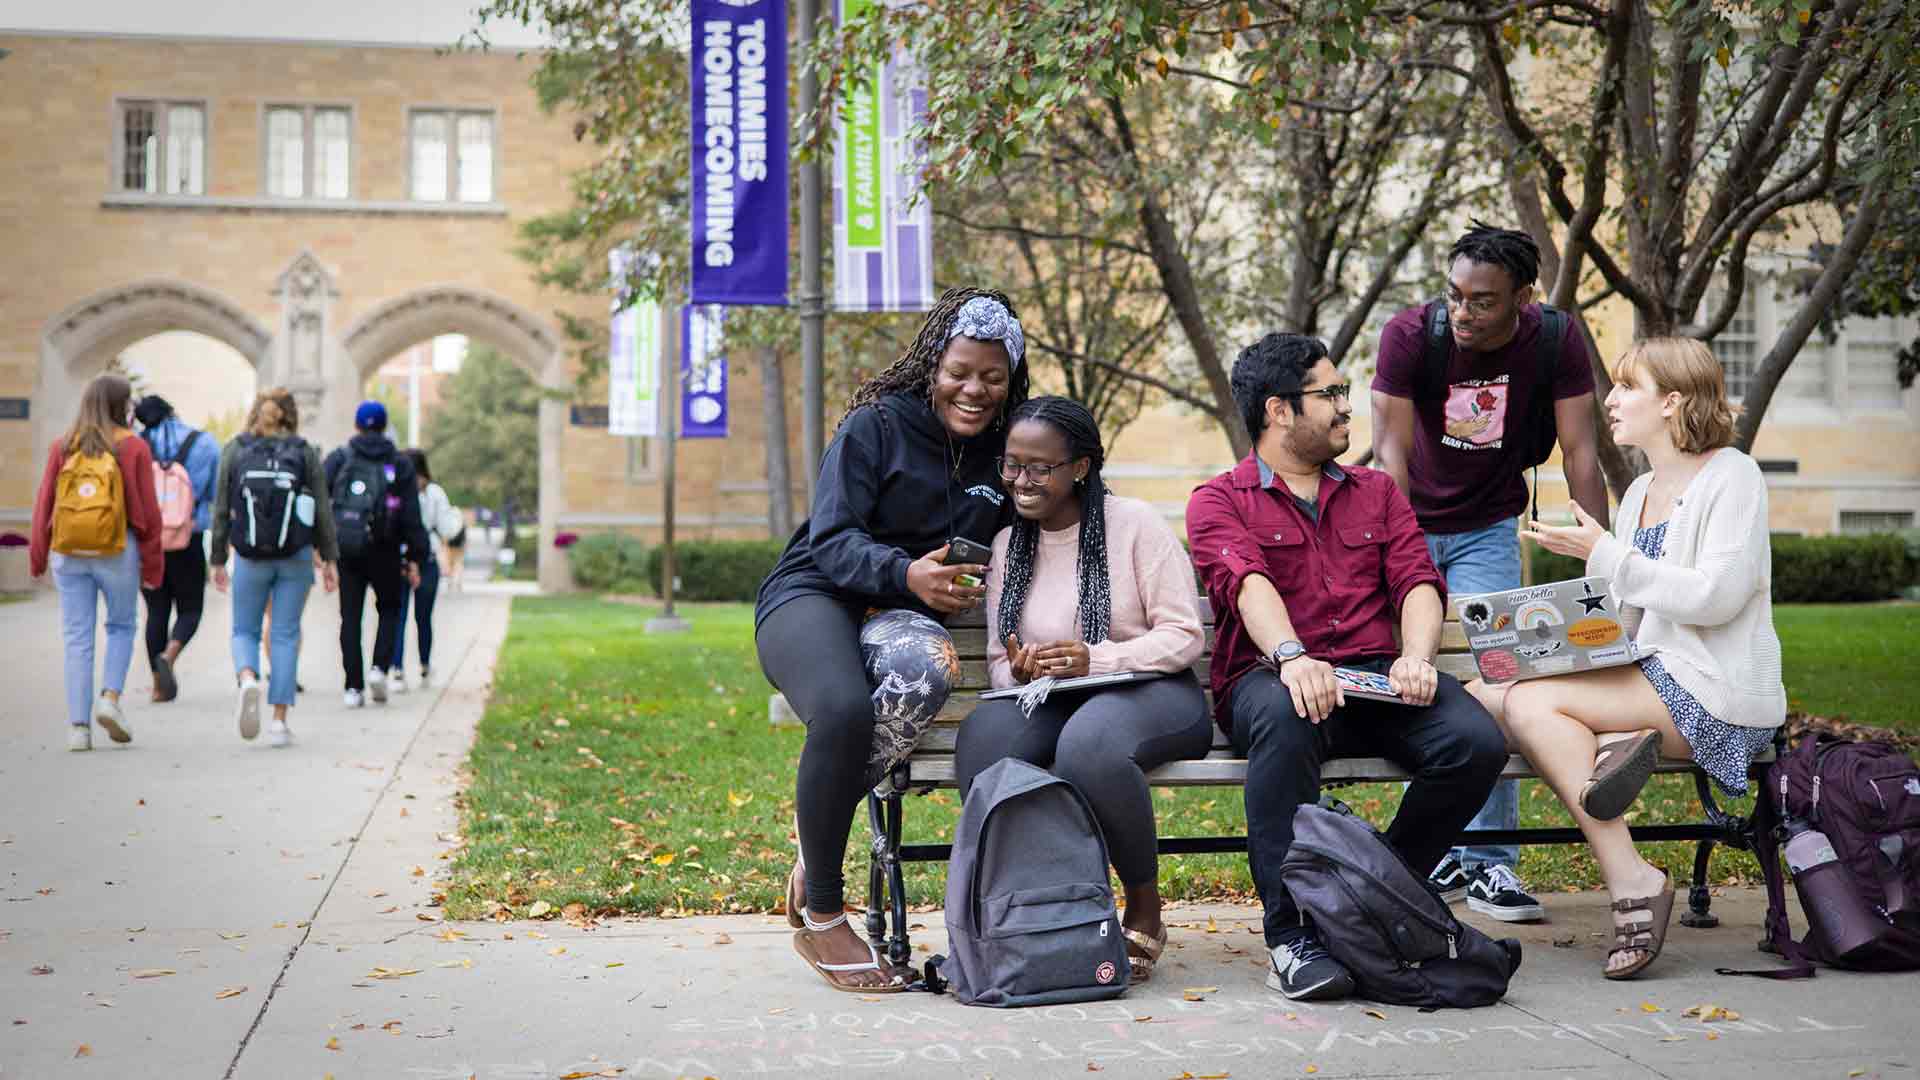 Students sitting on bench